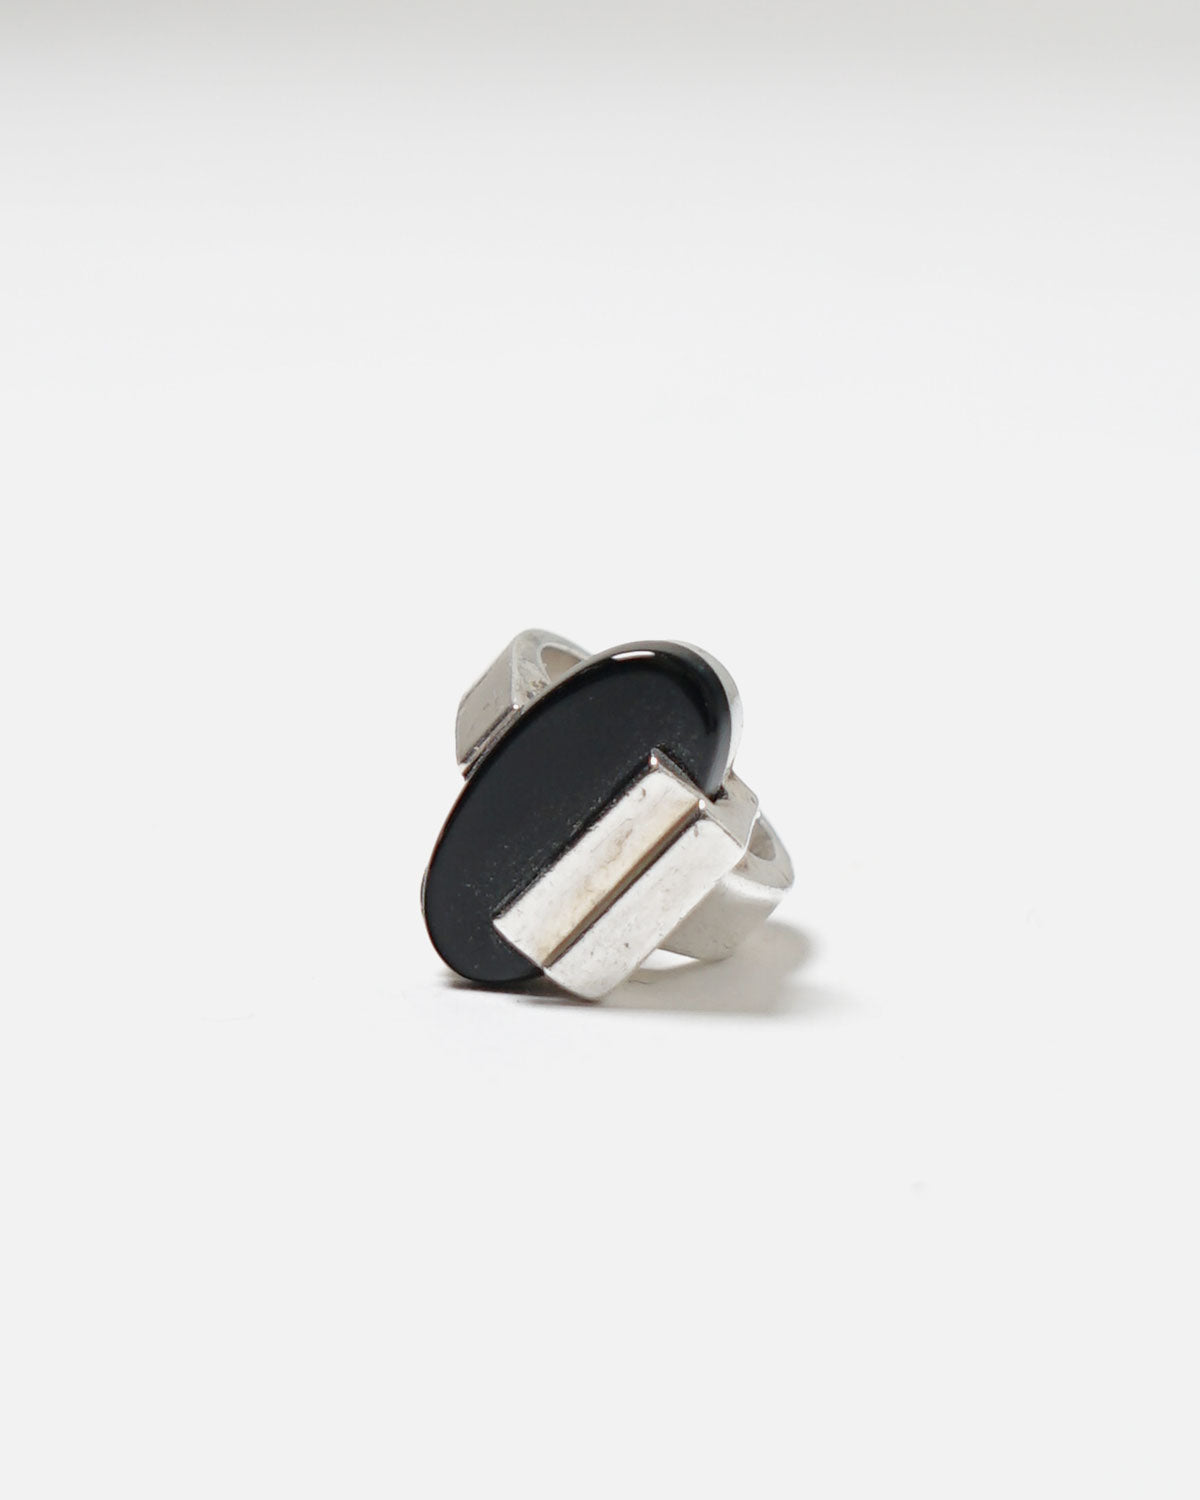 Silver x Onyx Ring / size: 3